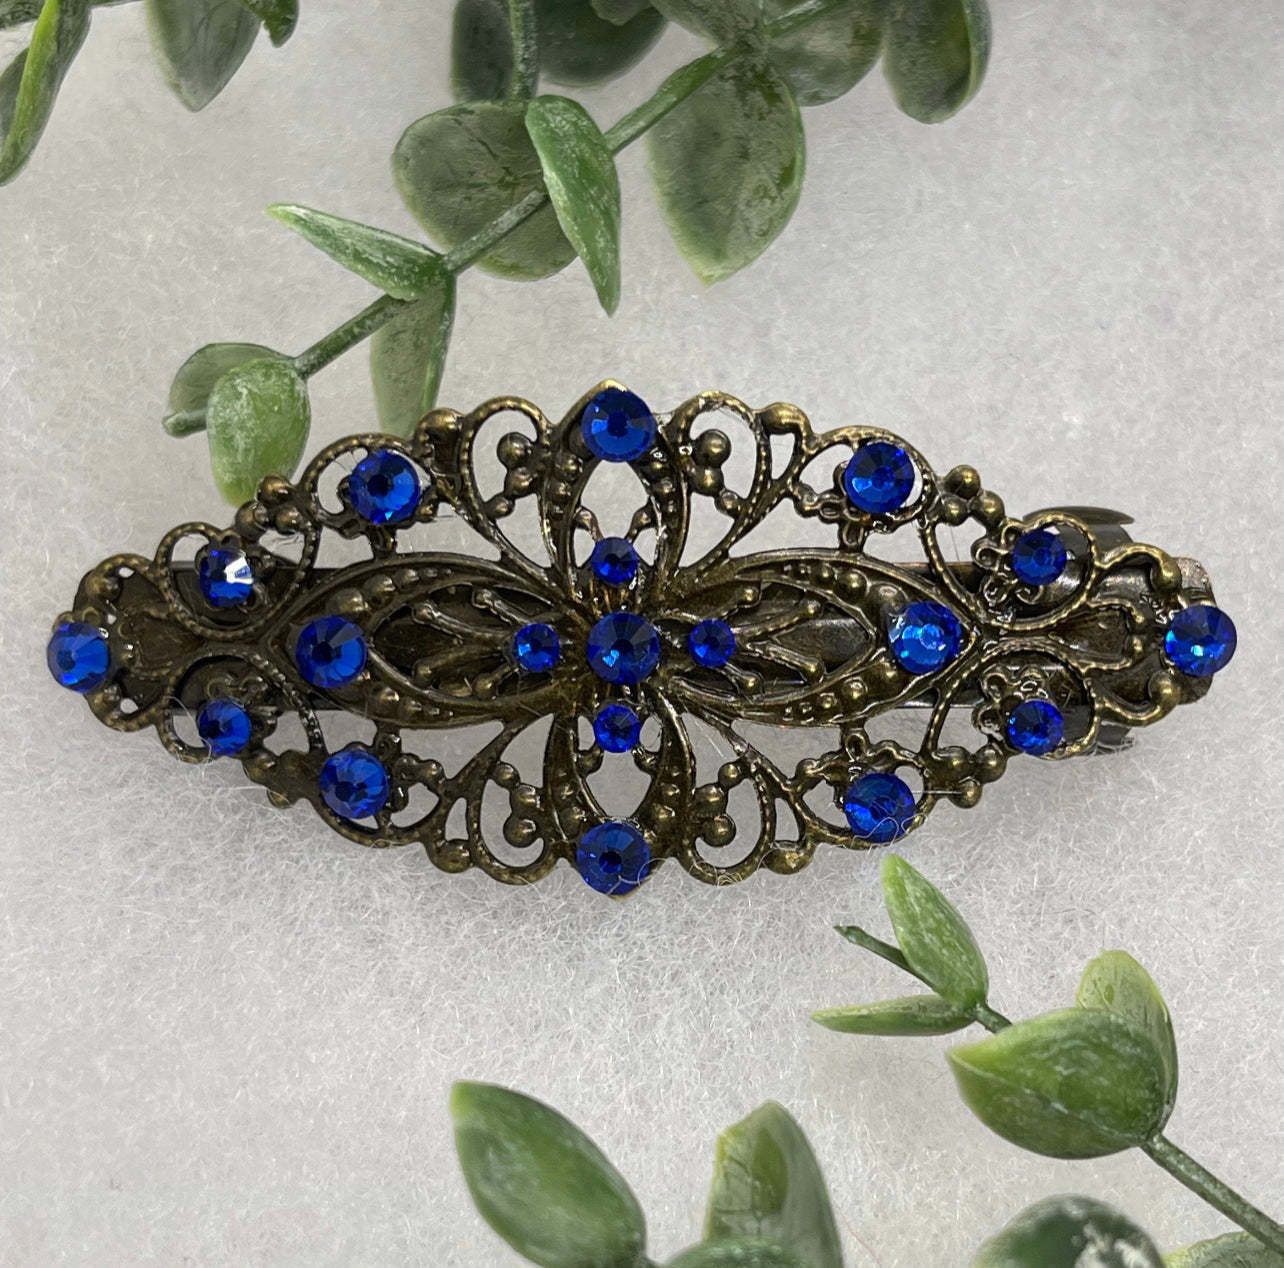 Blue sapphire crystal barrette Vintage Style 3.5”antique tone Metal bridal wedding shower birthday princess prom gift accessories